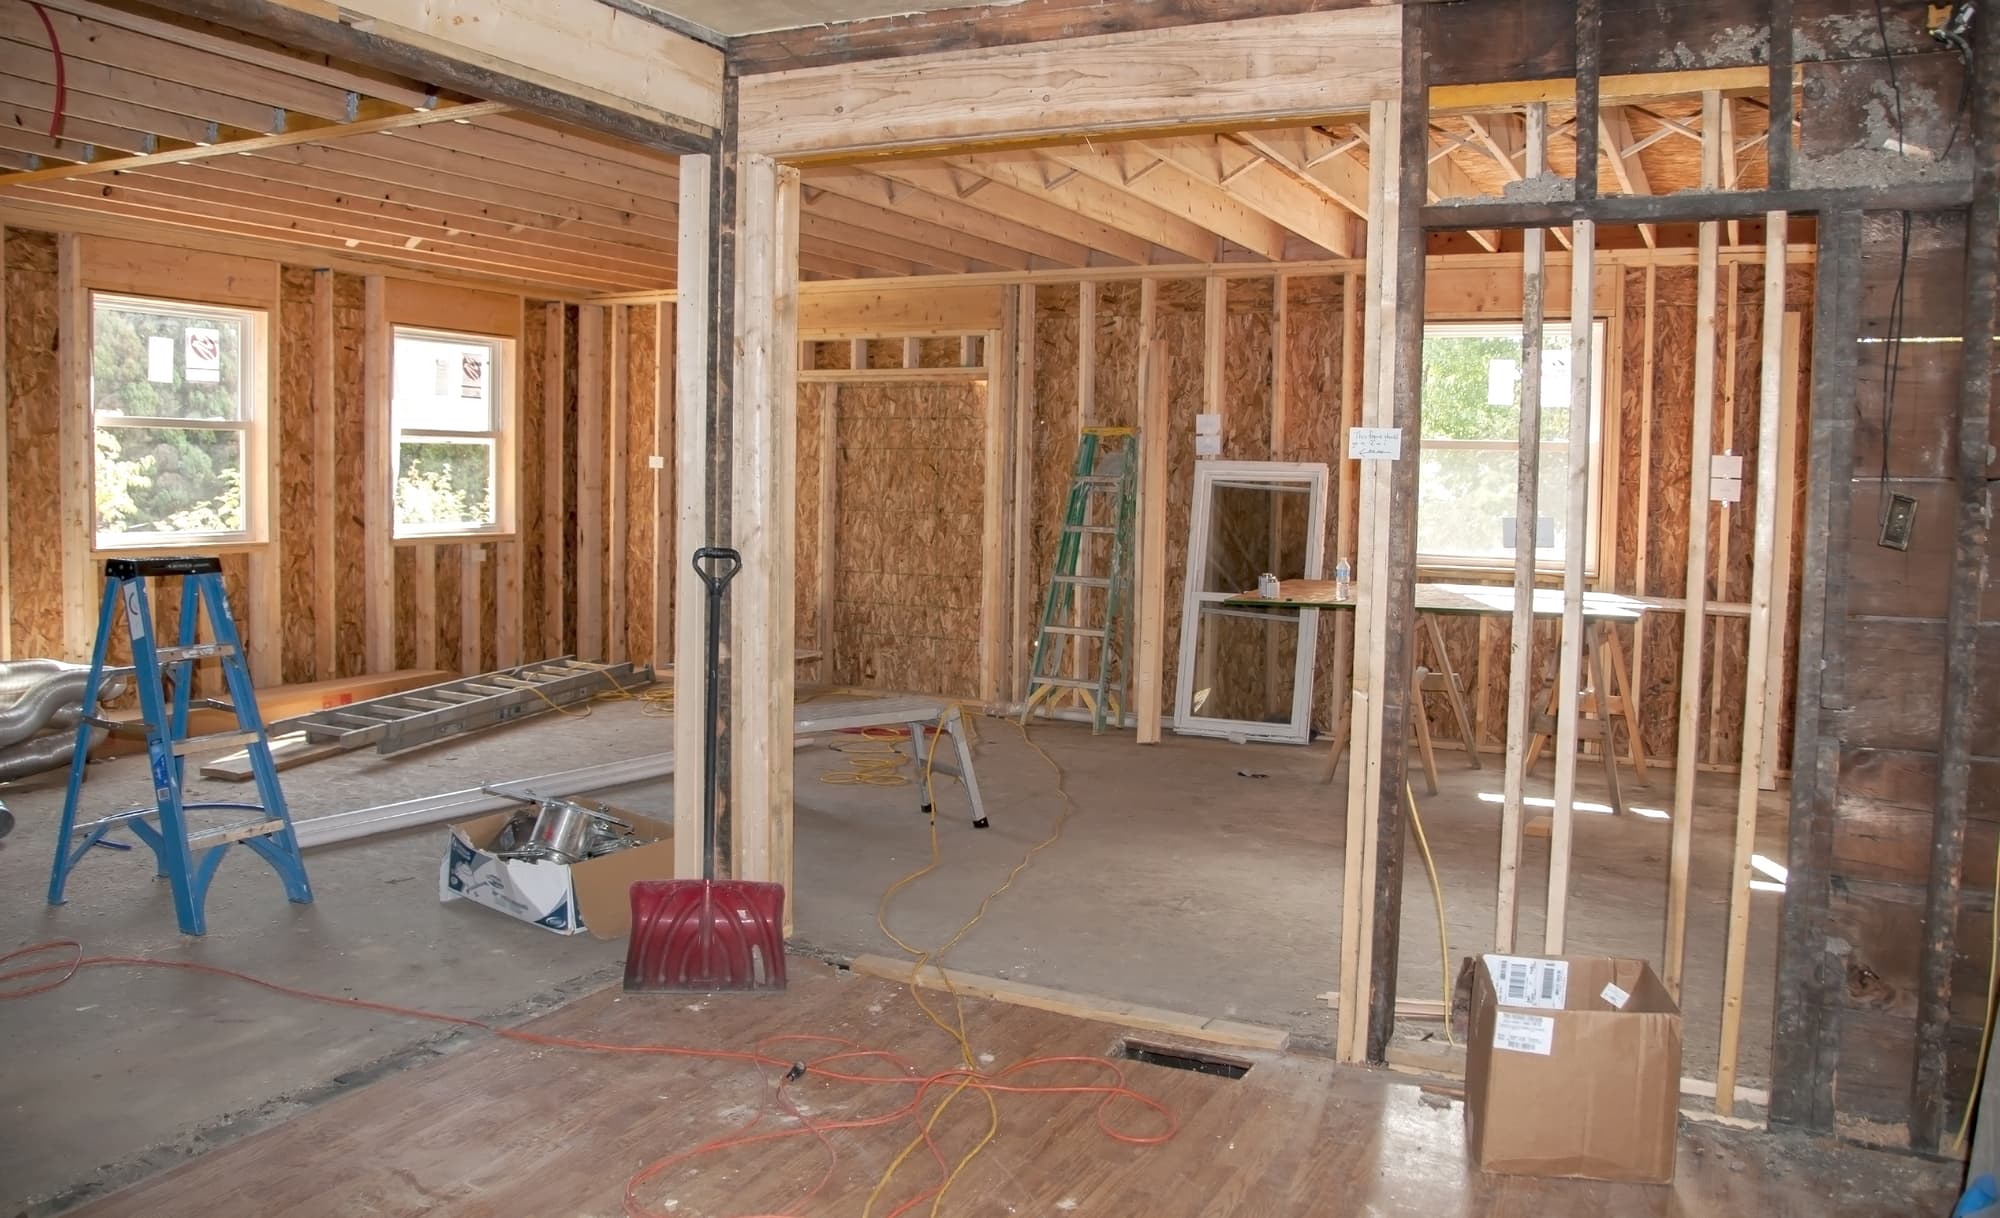 repairs and renovations on investment houses